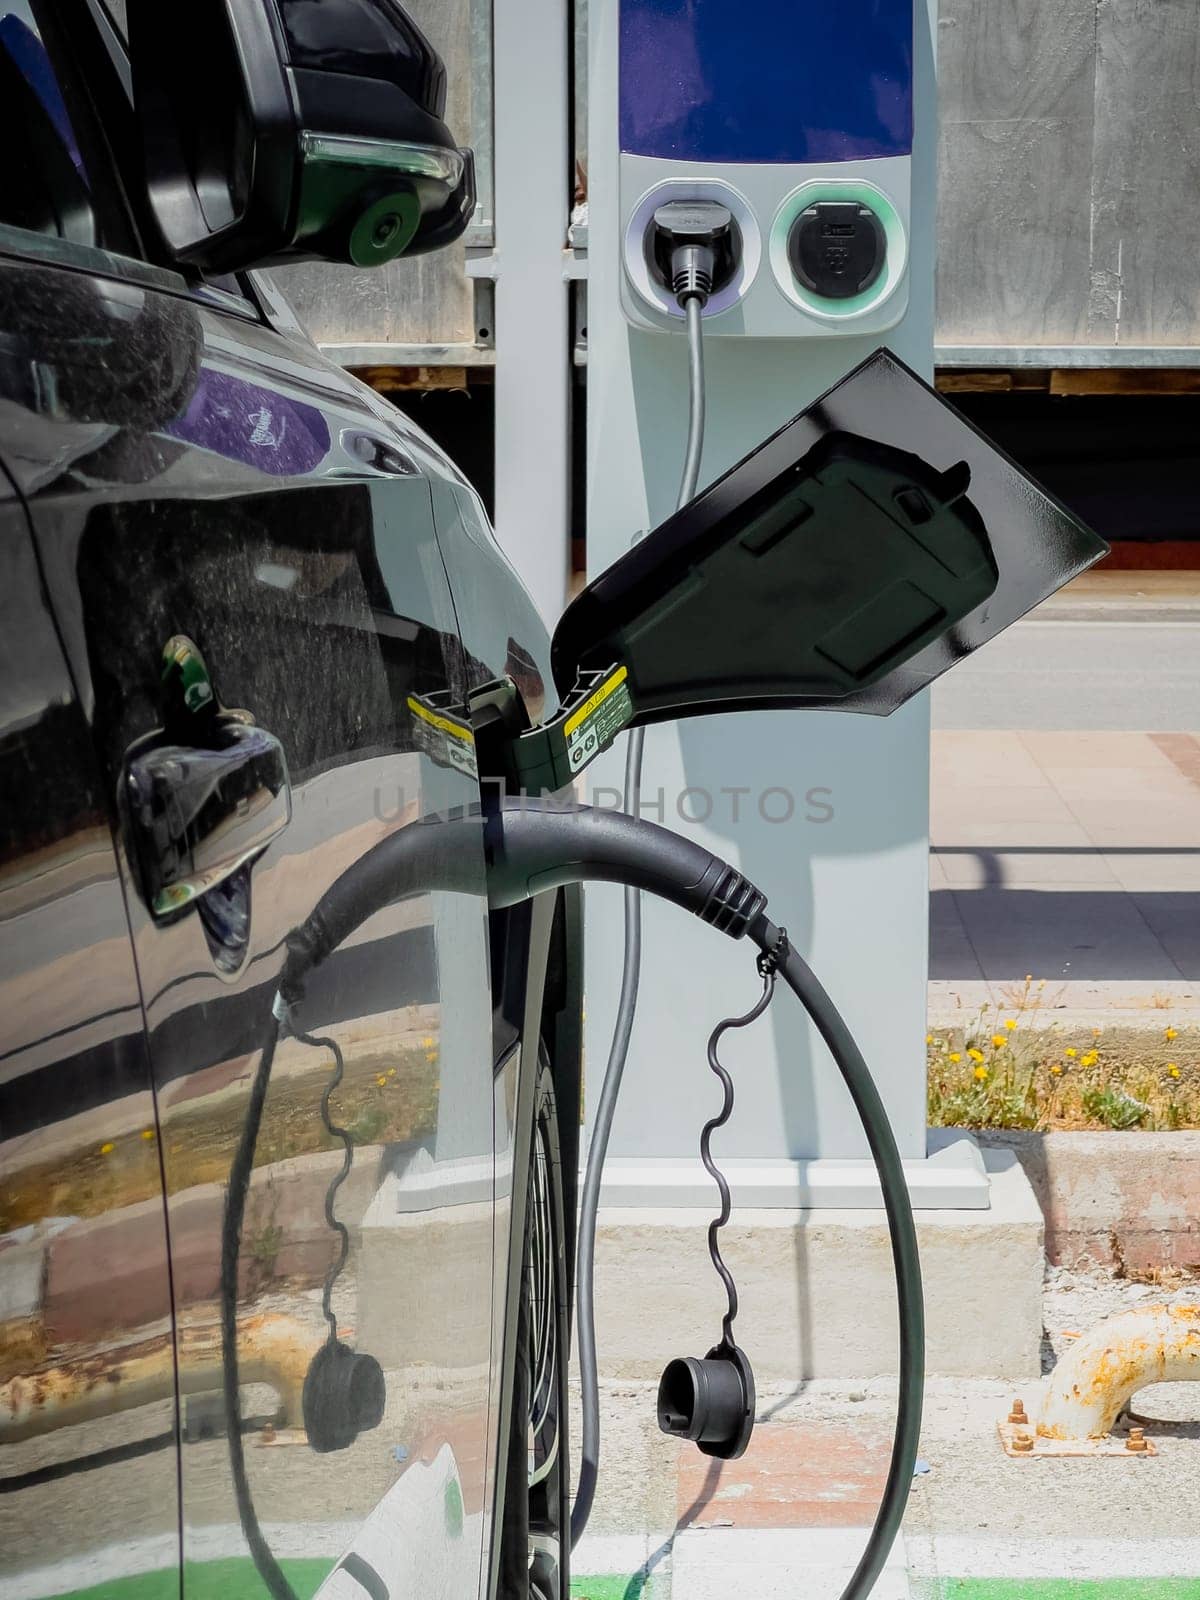 An electric car charging at the Electric vehicle charging station in the parking lot by Sonat